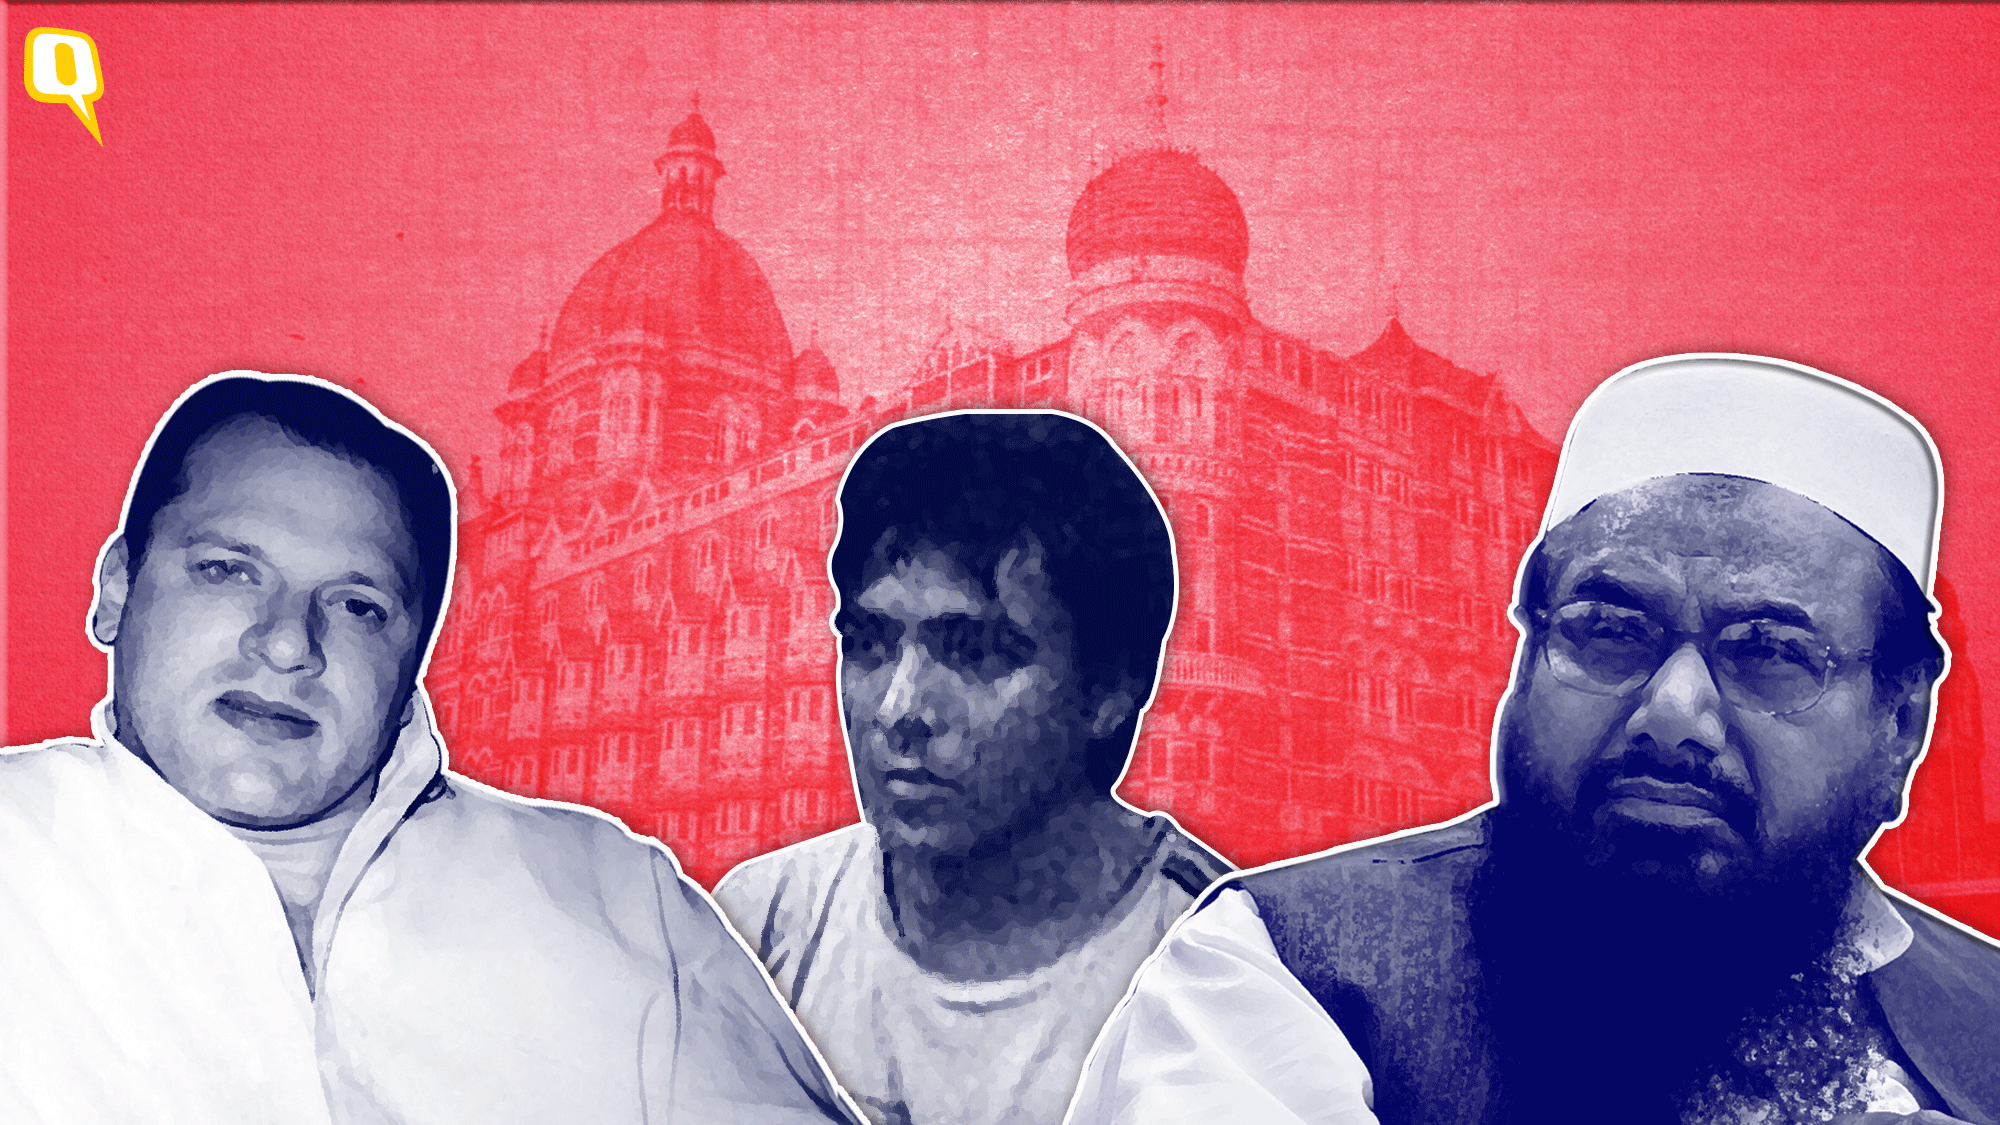 Ajmal Kasab and the nine other terrorists who attacked Mumbai were mere pawns. Their bosses are still across the border, some of them walking free.